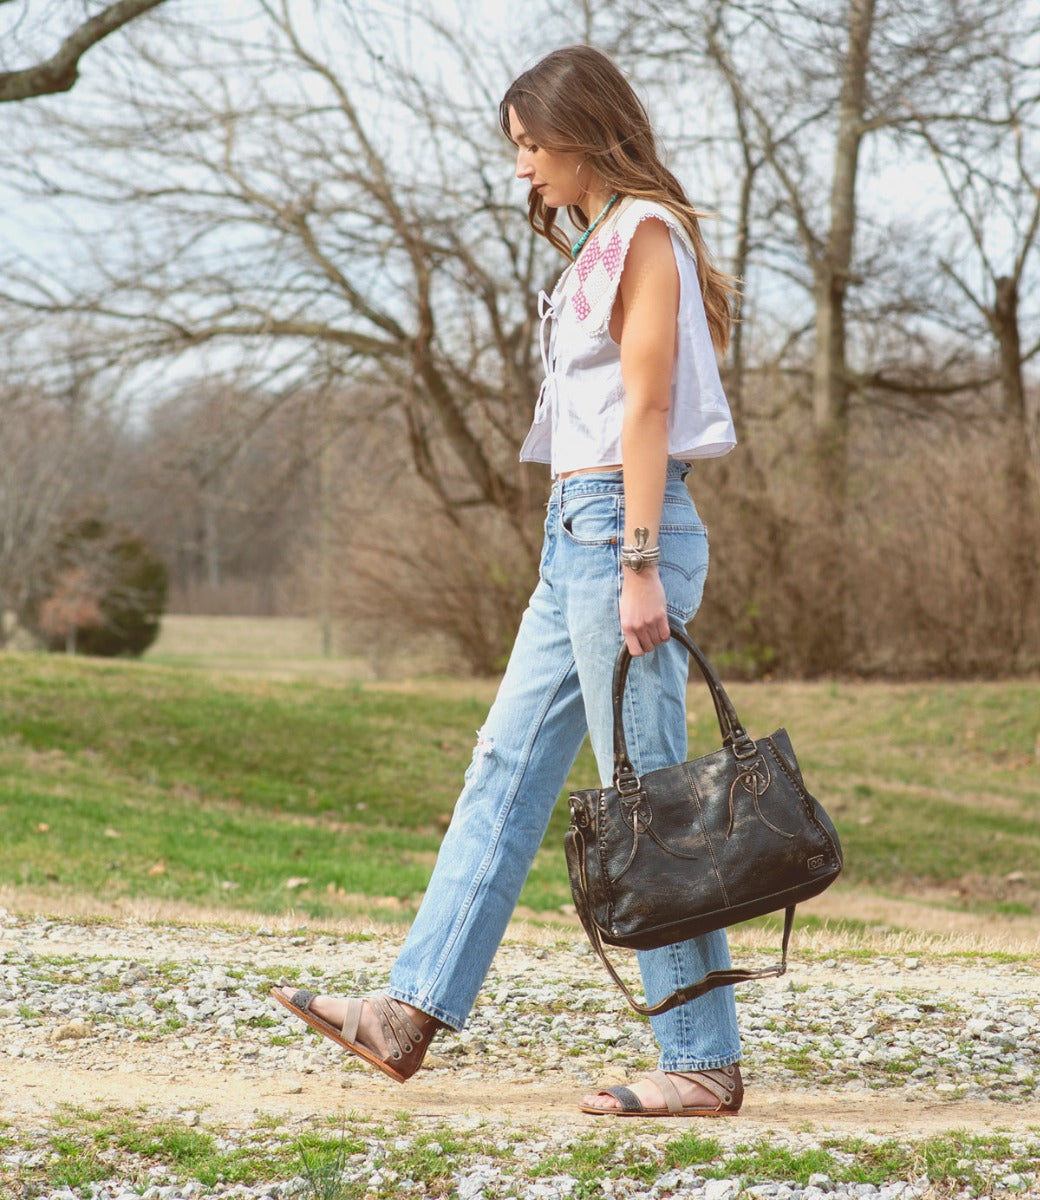 A woman wearing jeans and an Artemis purse walking down a dirt road by Bed Stu.